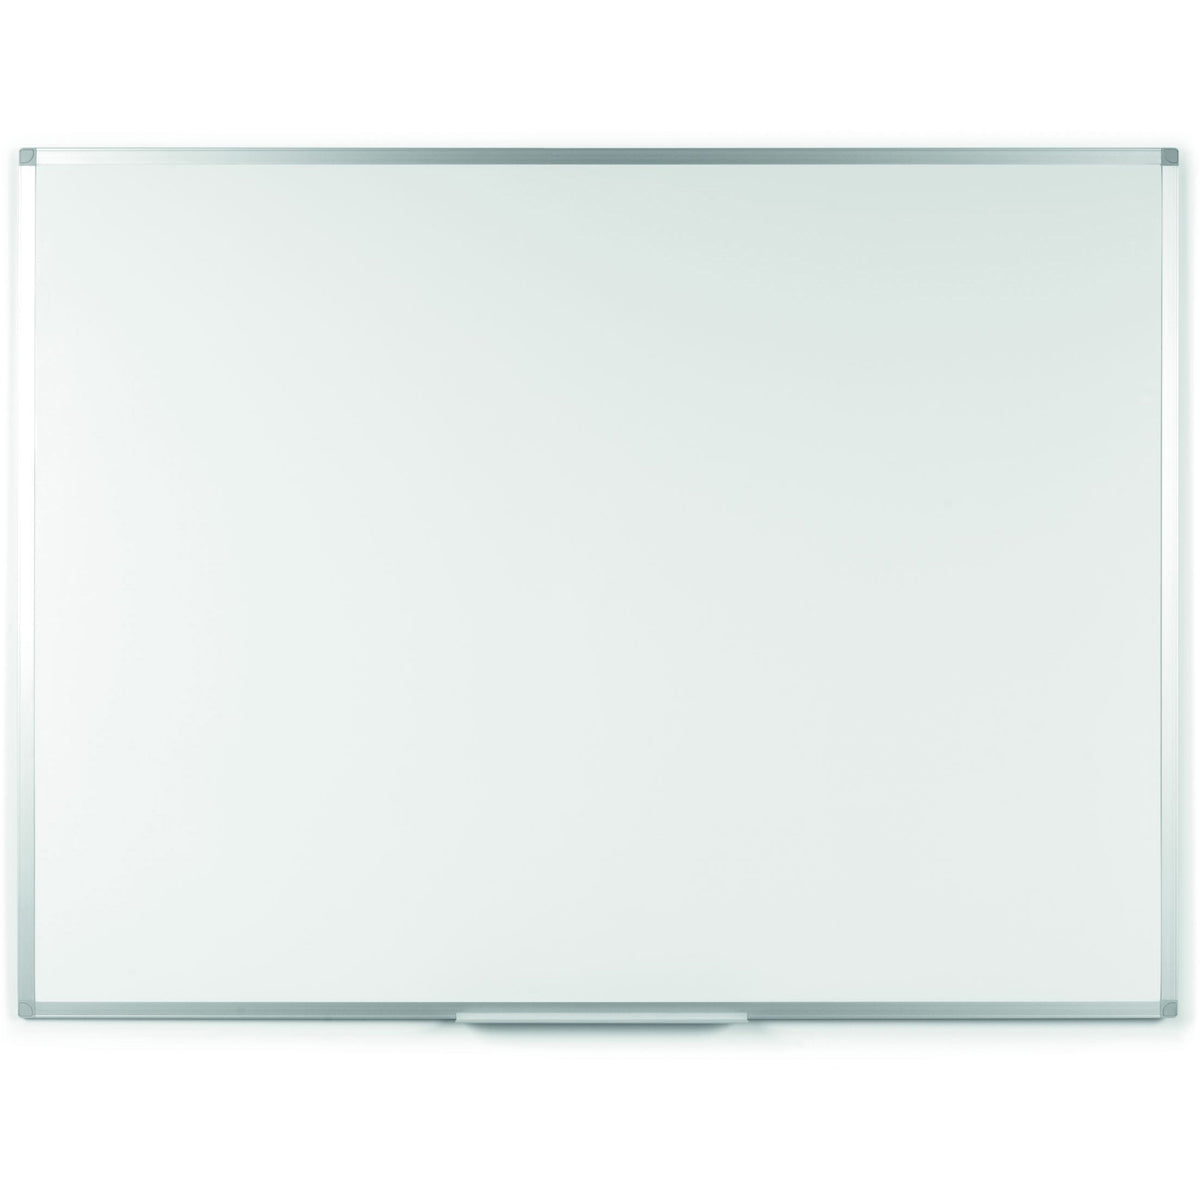 MA05759214 Ayda Magnetic Steel Dry Erase White Board, 36" x 48", Aluminum Frame, Wall Mounting Kit by MasterVision